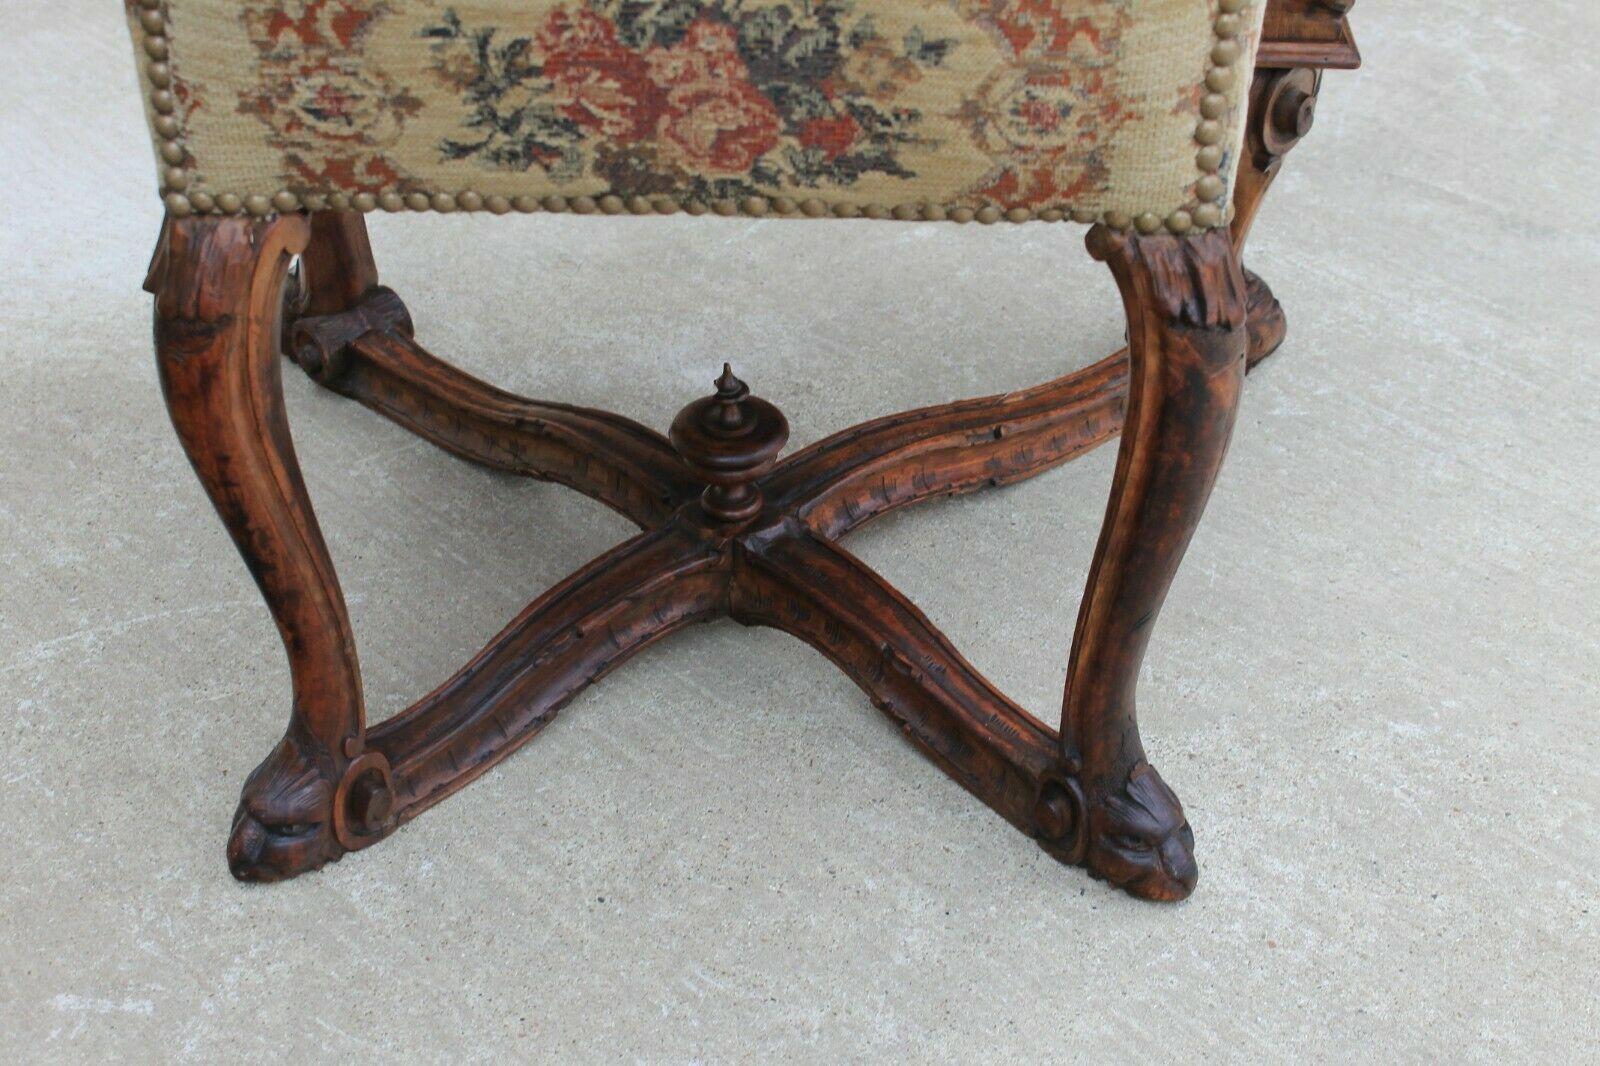 Antique Italian Besarel Walnut Arm Chair Baroque Upholstered Mid-19th C Rare For Sale 5